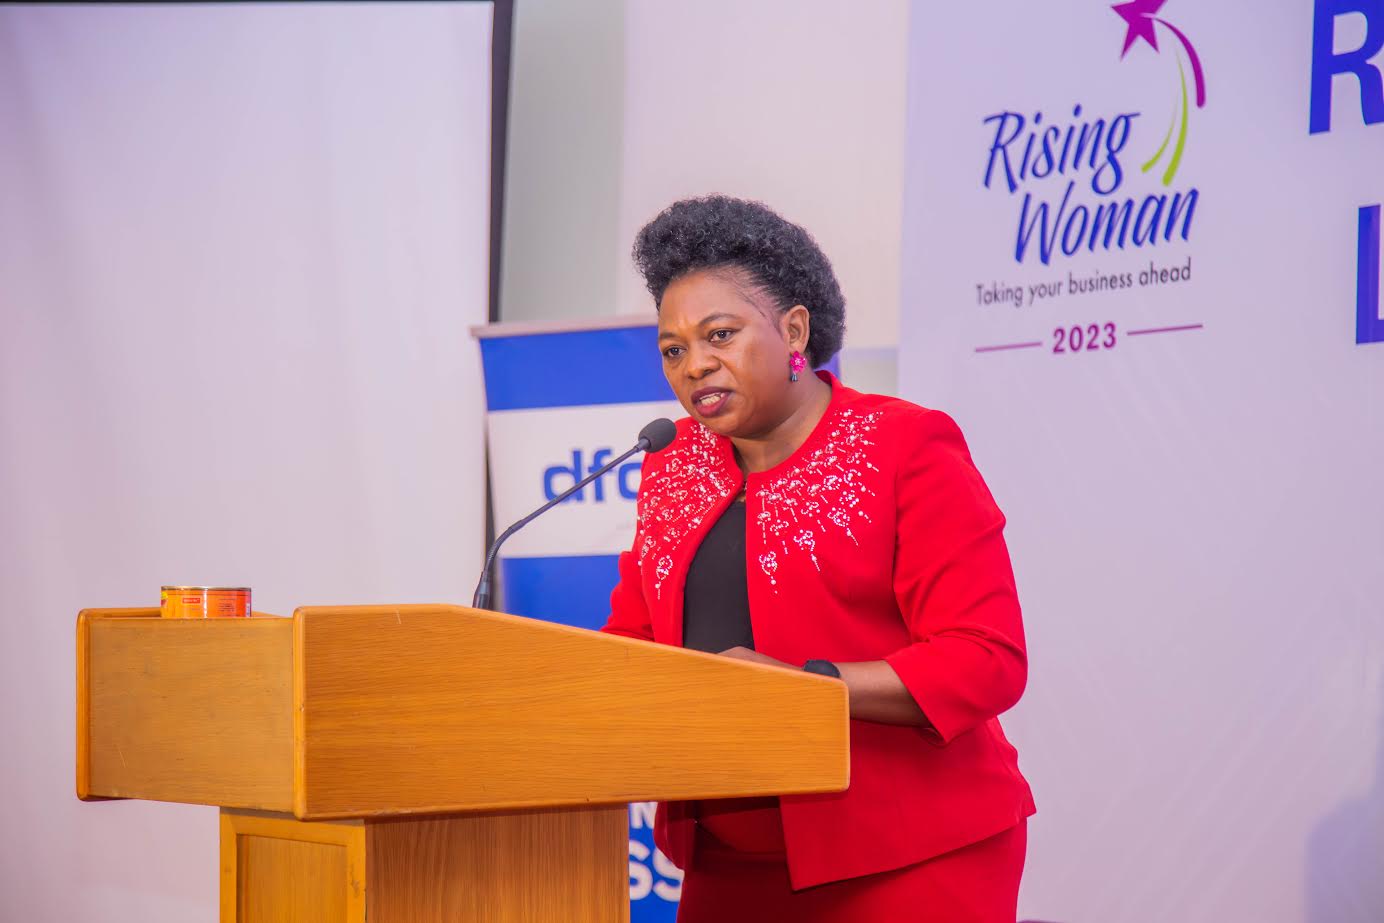 Dfcu launches sixth  edition of Rising Woman Initiative